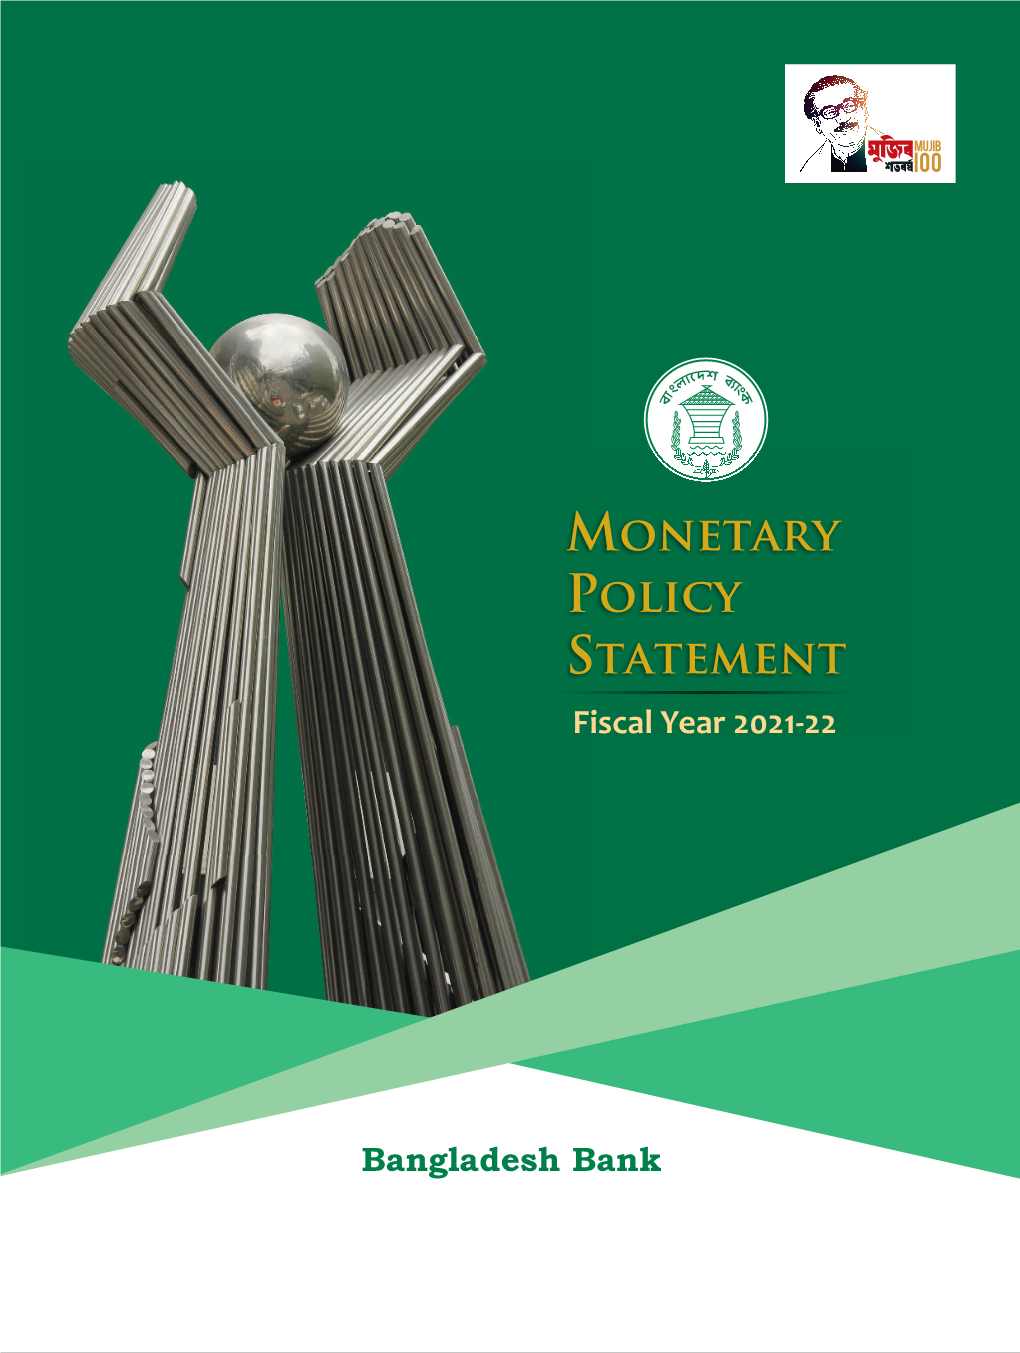 Fiscal Year 2021-22 Monetary Policy Statement Team